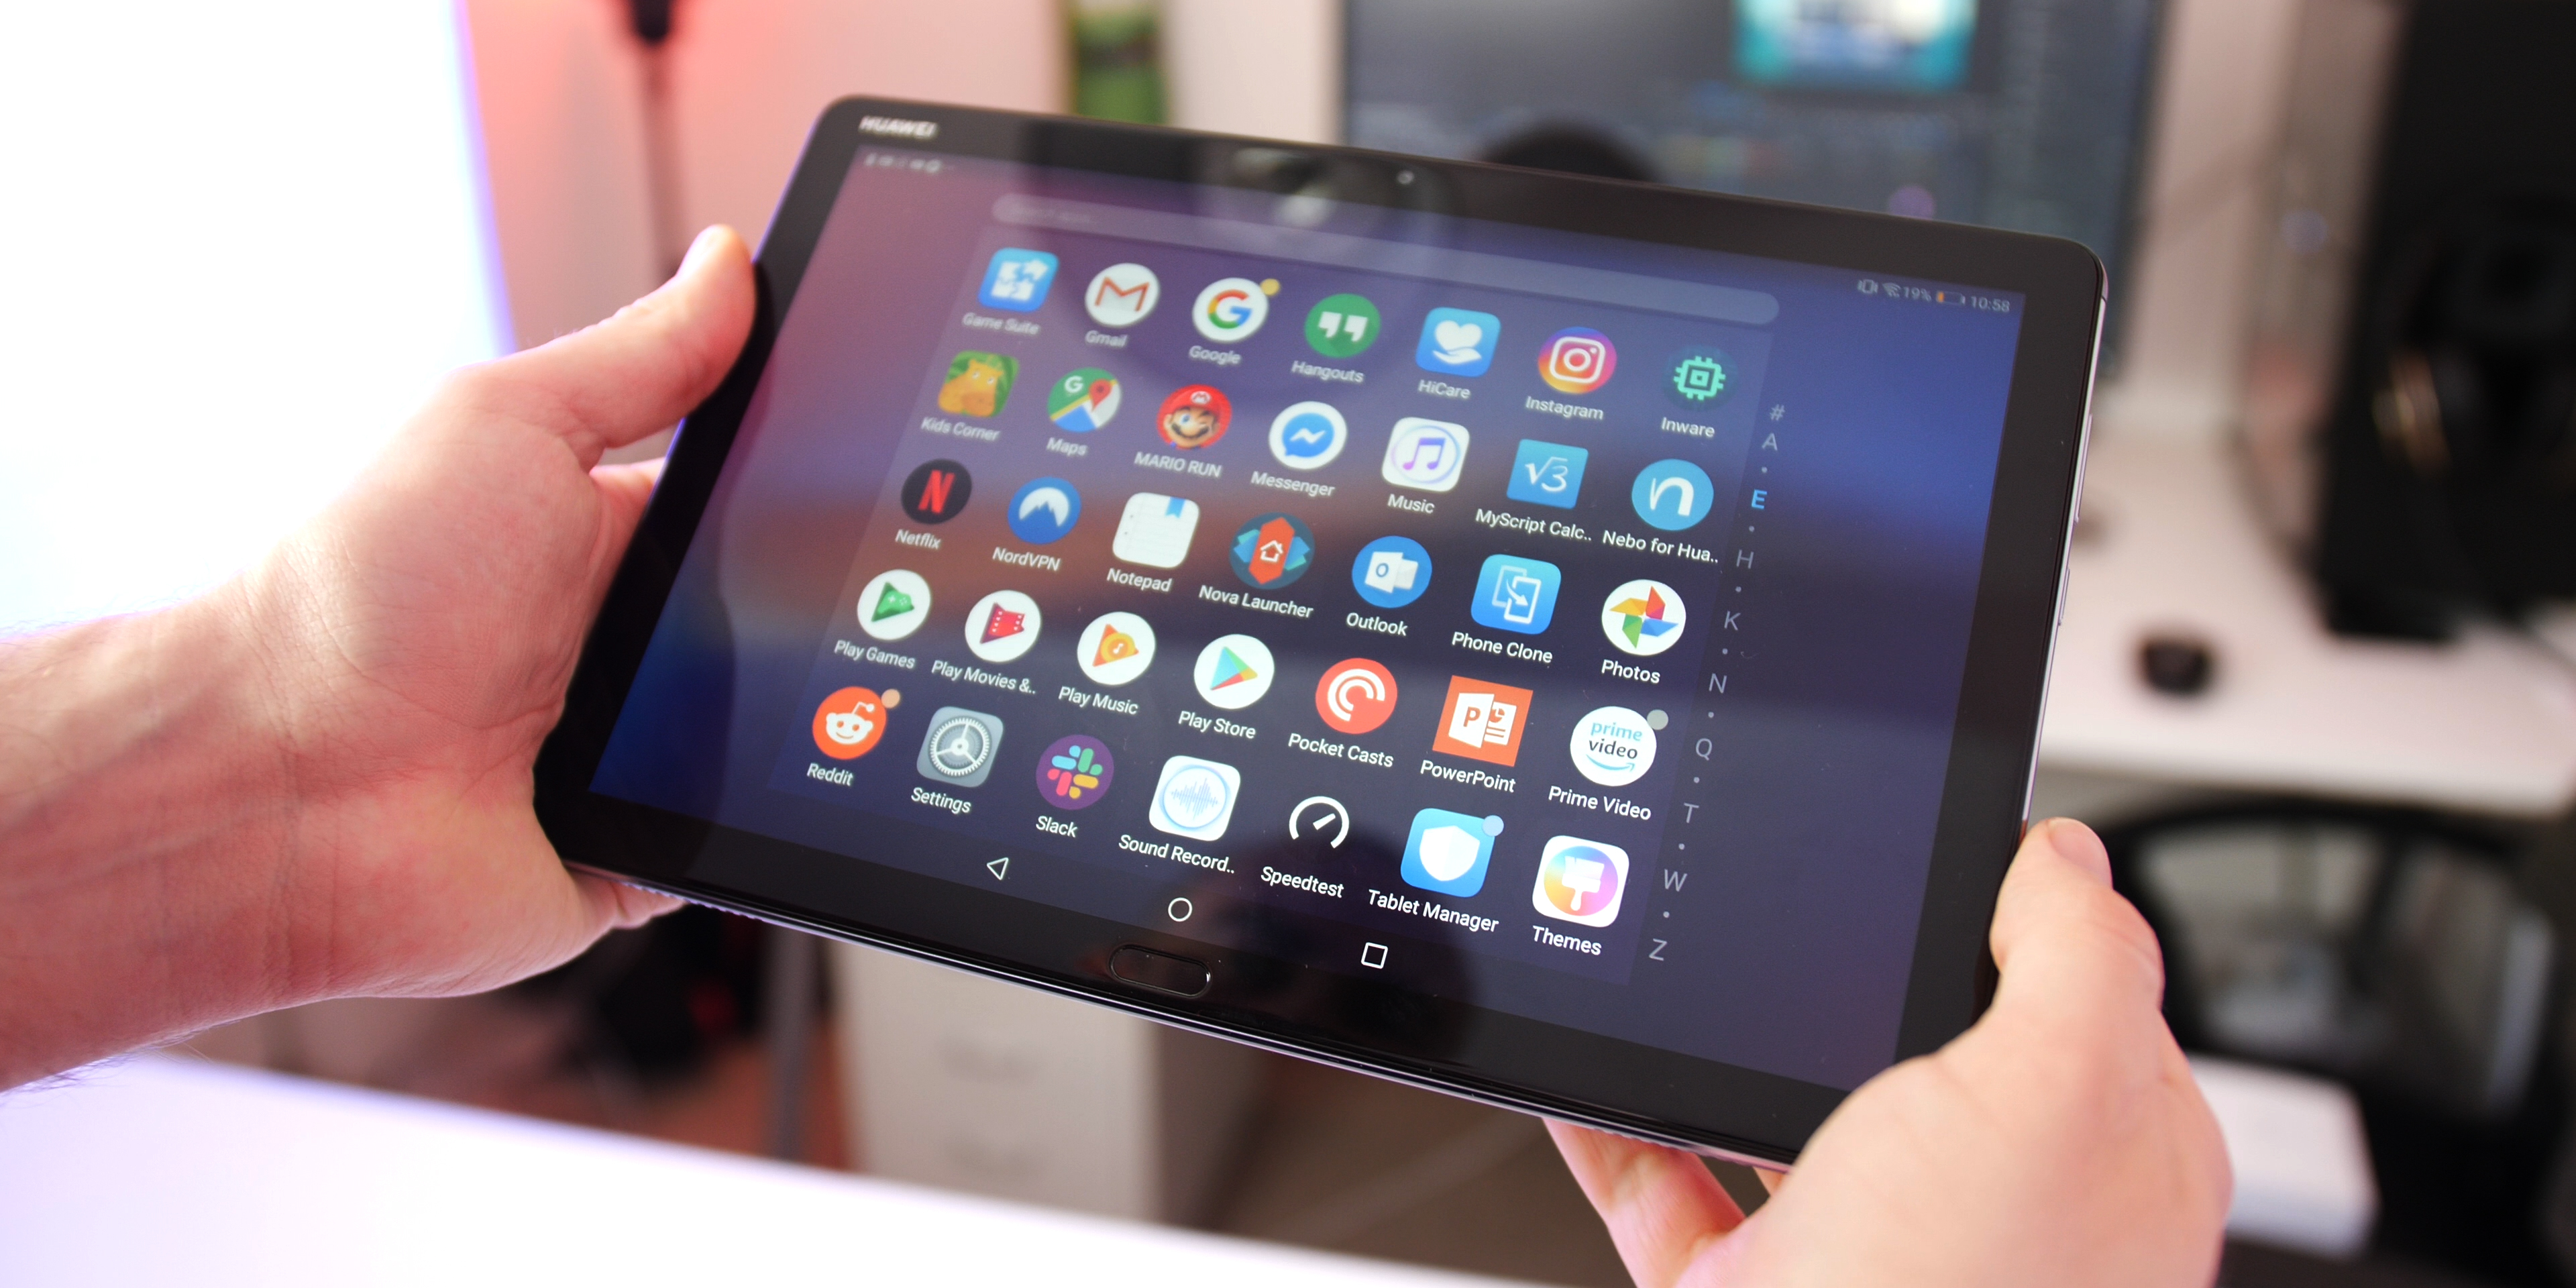 Huawei MediaPad M5 Lite review: A decent Android tablet - 9to5Google